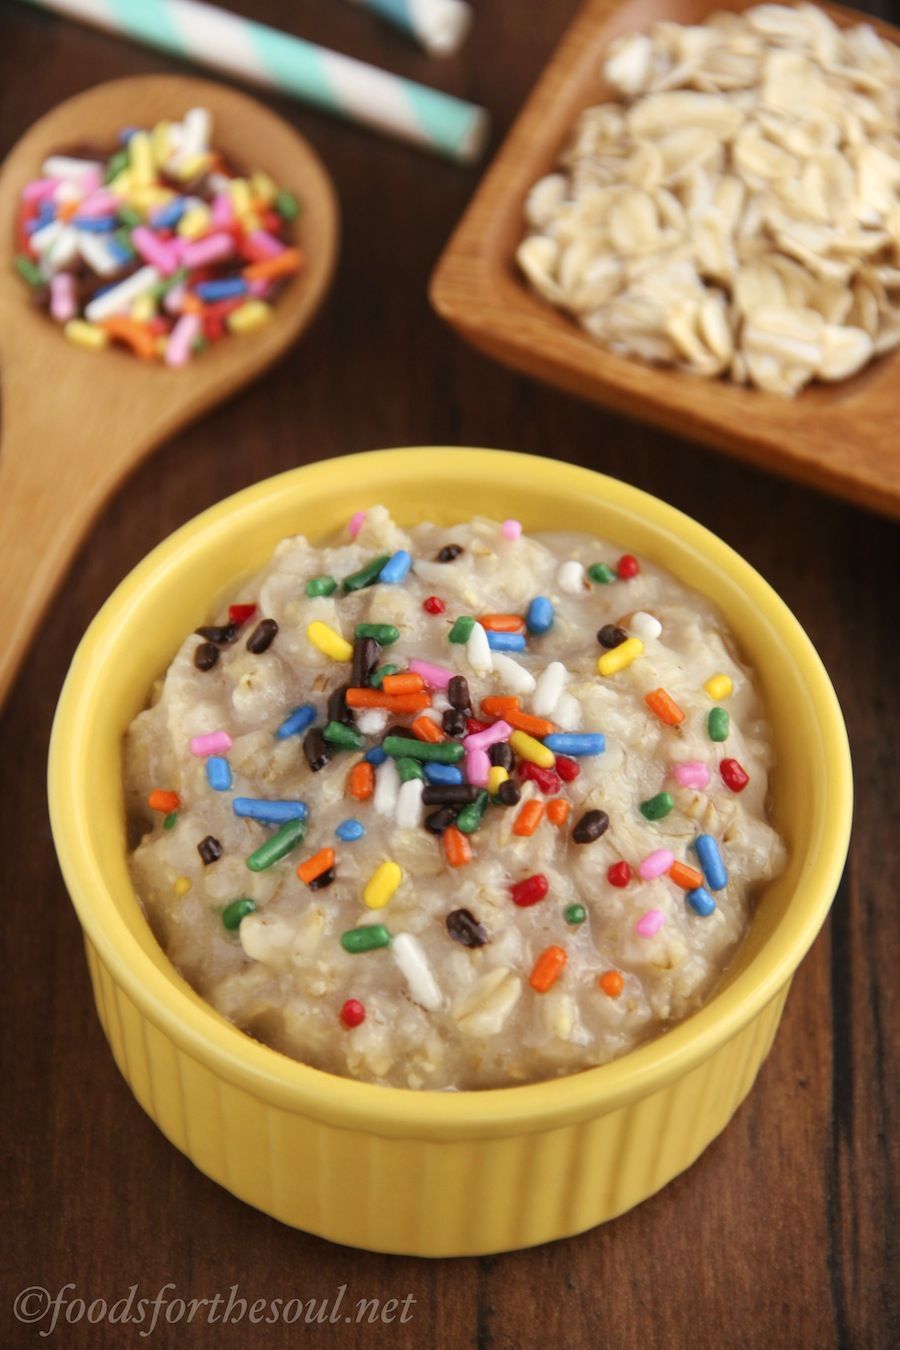 This healthy oatmeal tastes exactly like funfetti cake batter but has 9 grams of